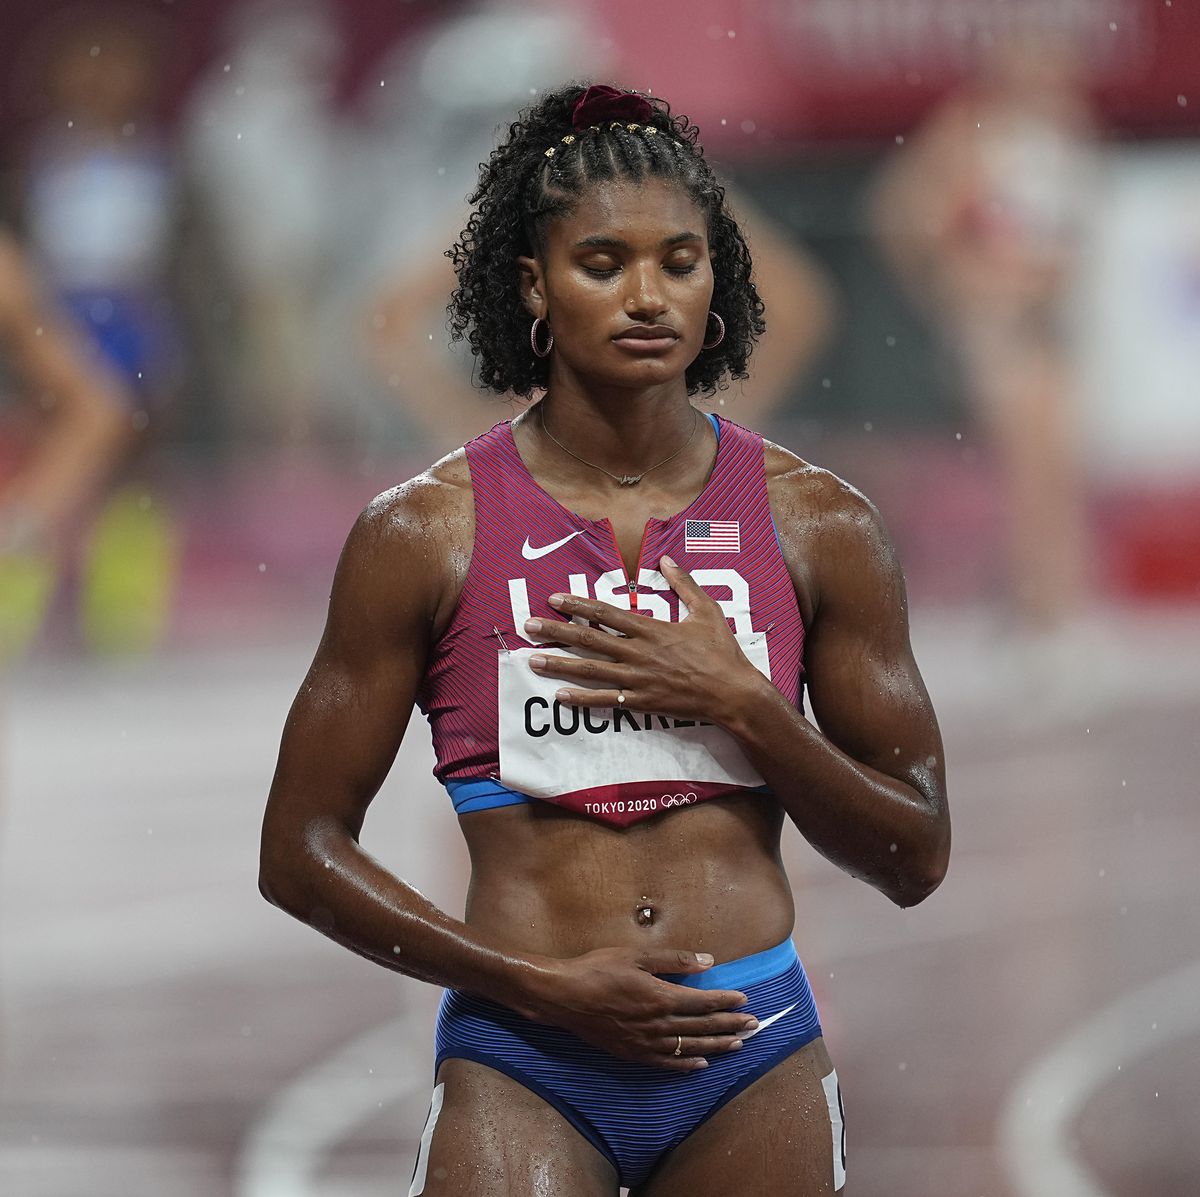 U.S. women's track making strides with new wave of athletes - Los